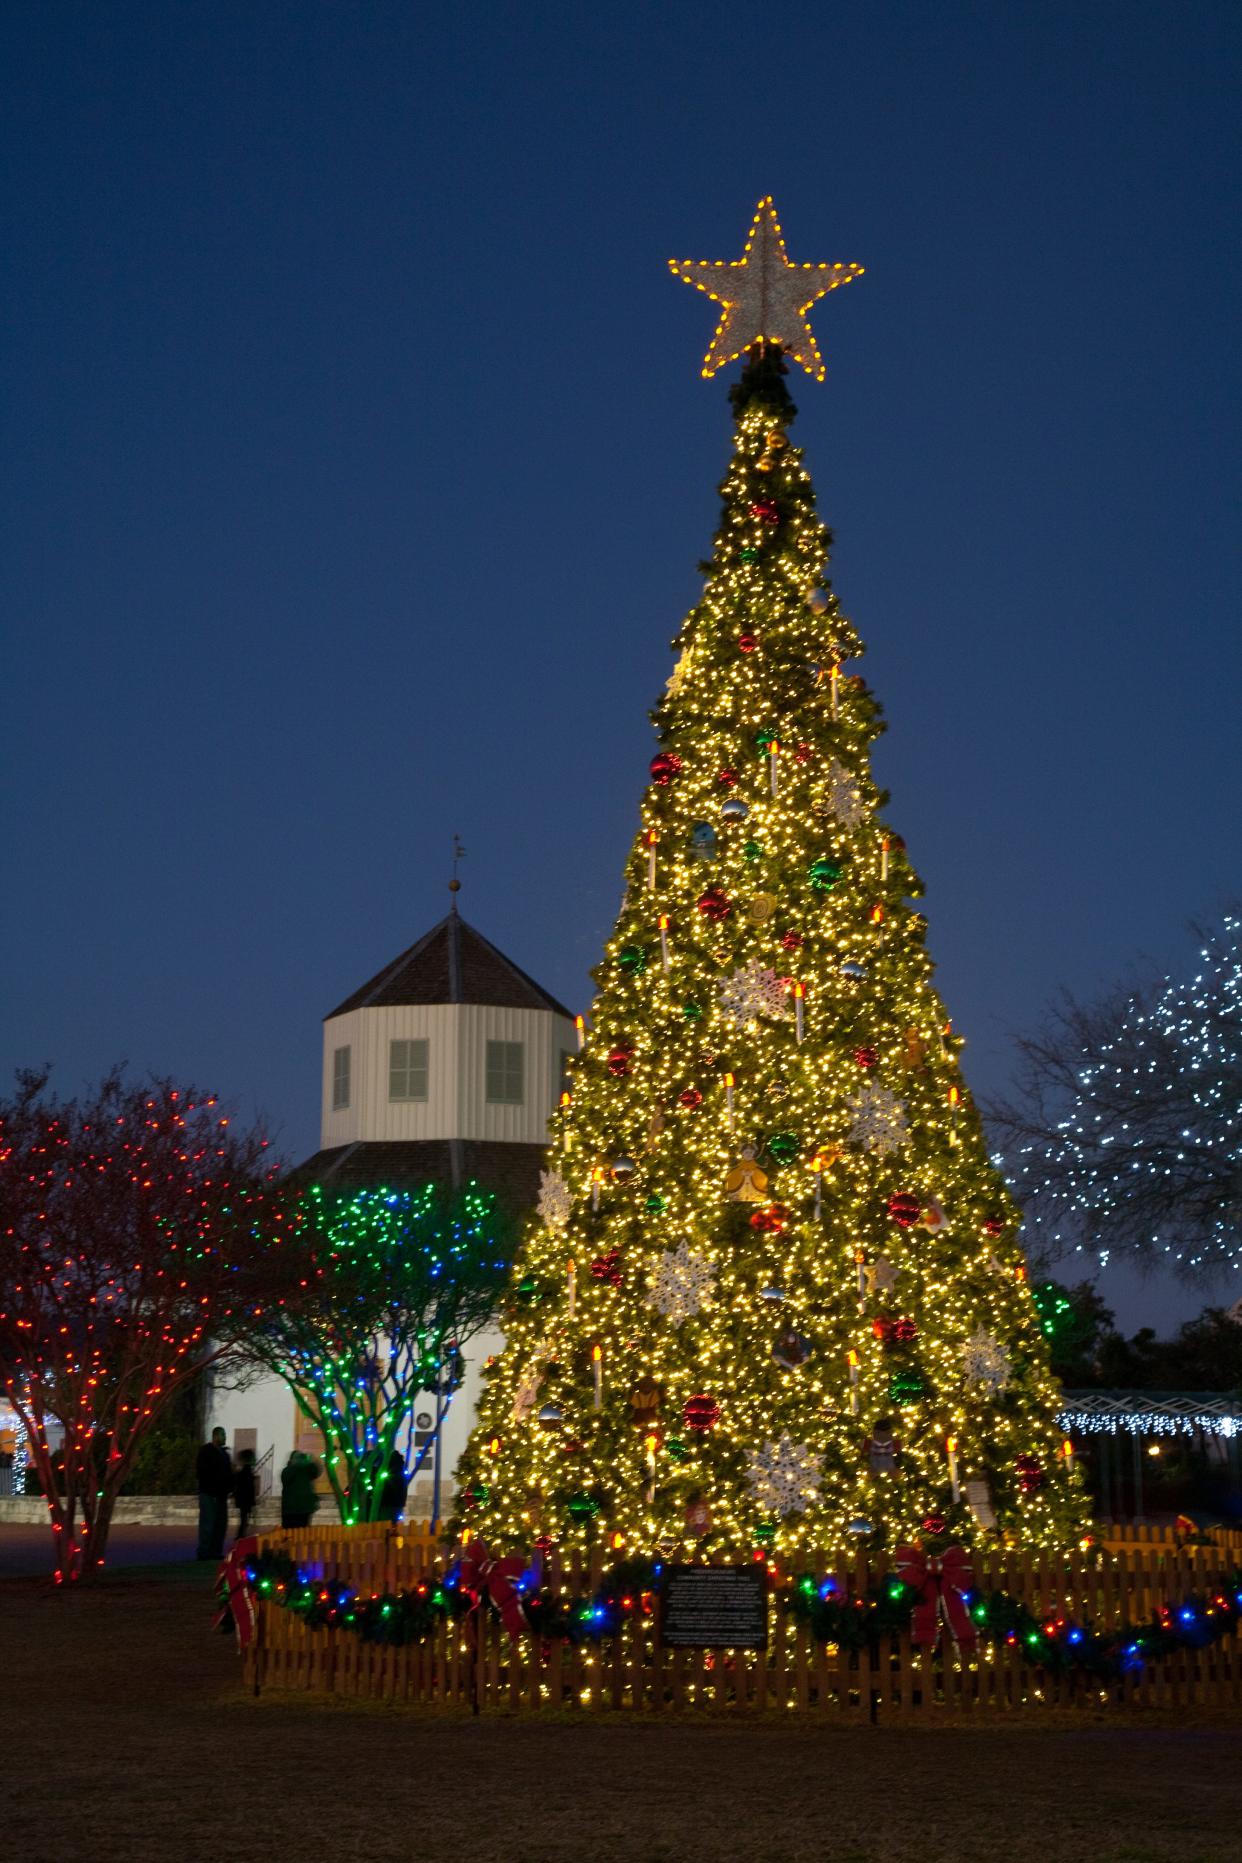 Christmas in Fredericksburg includes ice skating, shopping and a 30-foot-tall tree.